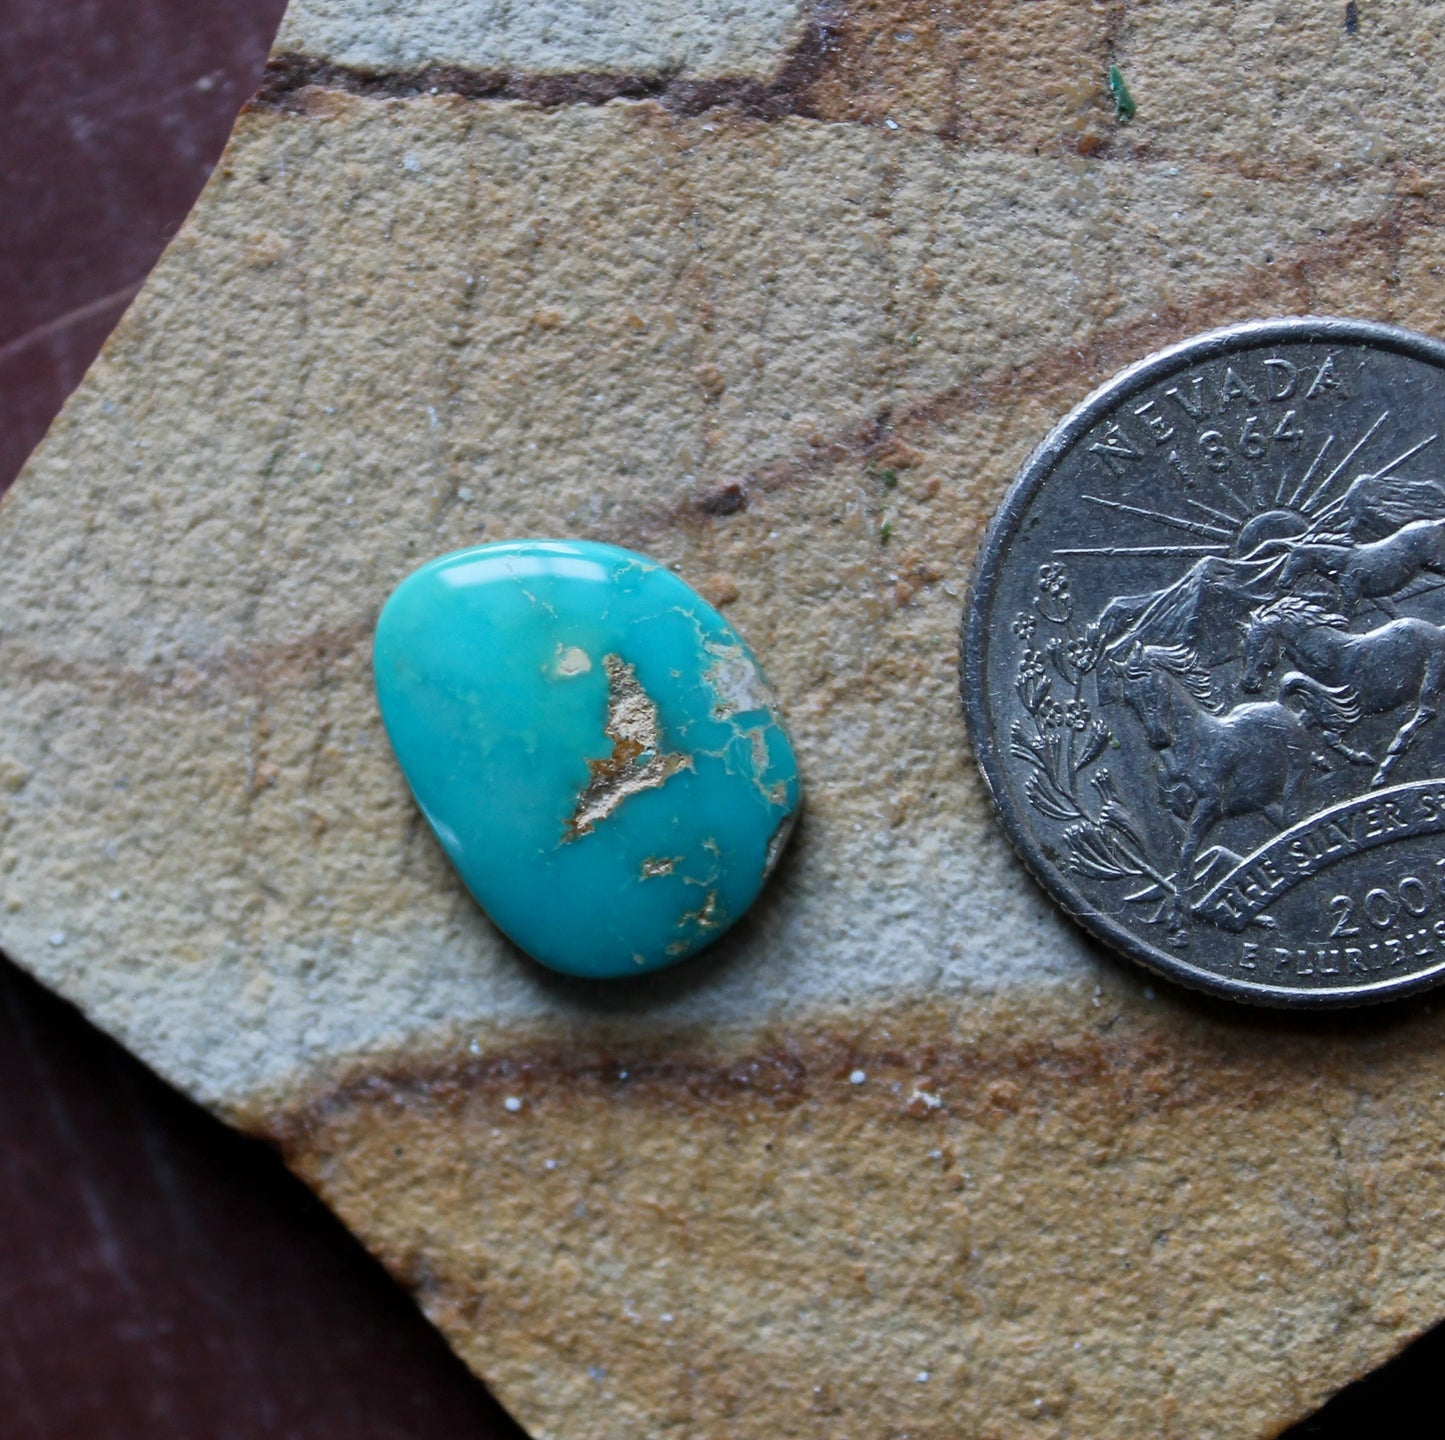 6 carat teal blue Stone Mountain Turquoise cabochon